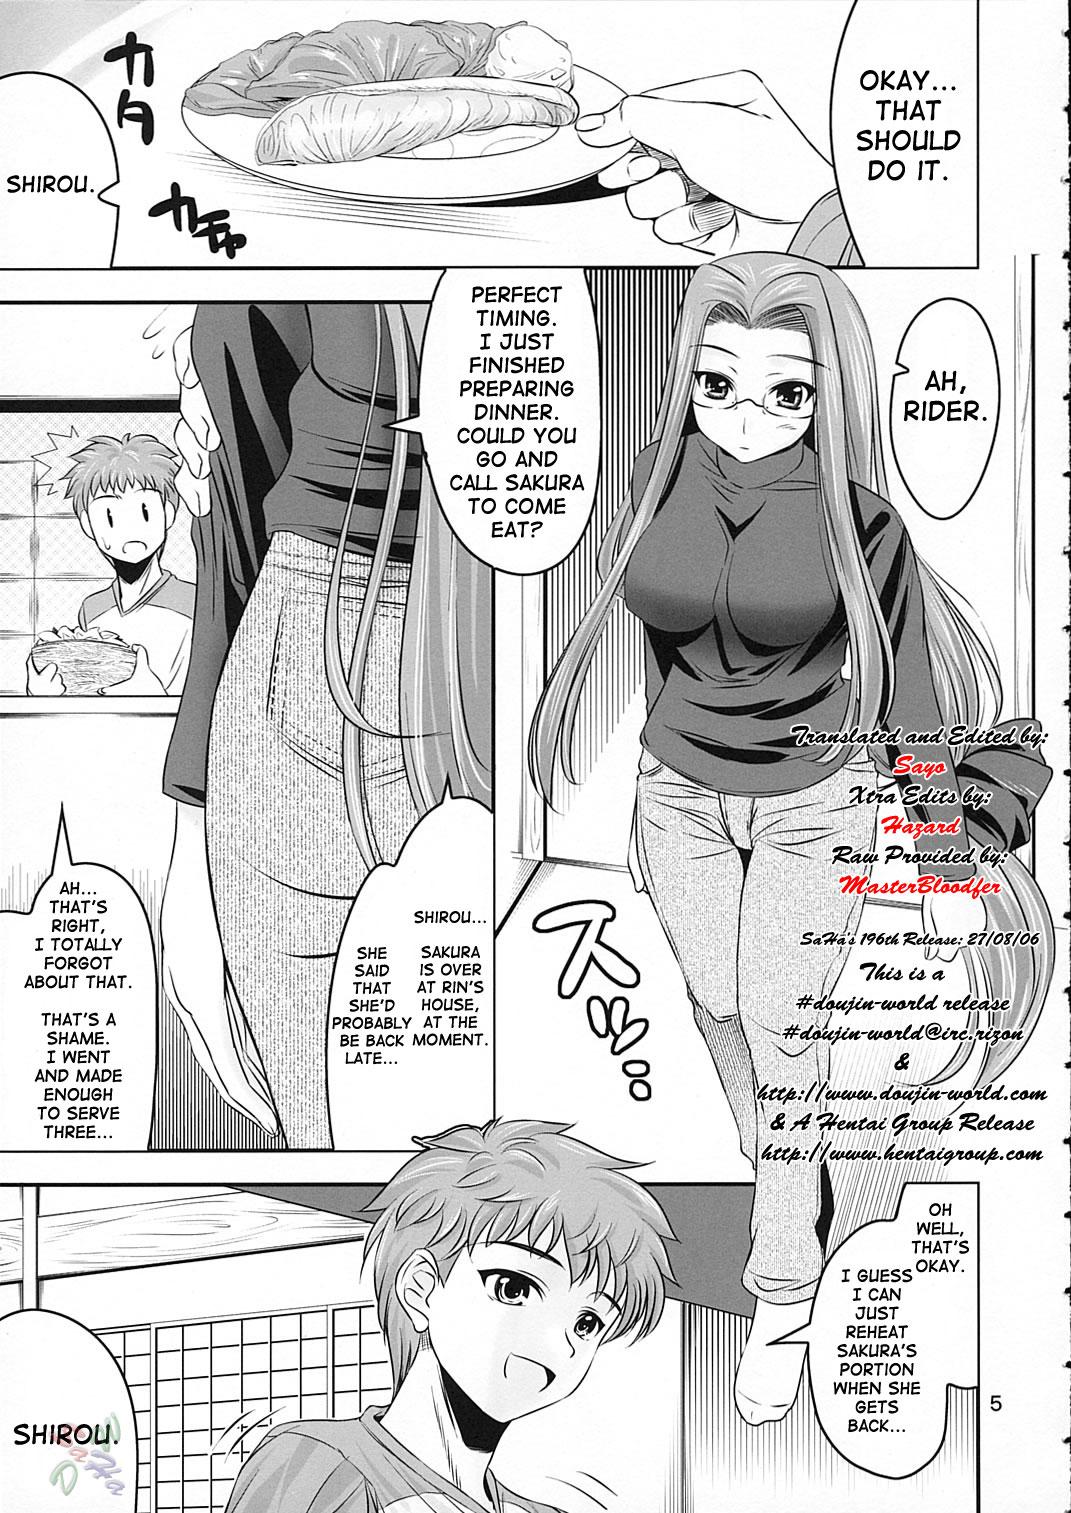 Spooning Simiken - Fate stay night Enema - Page 5